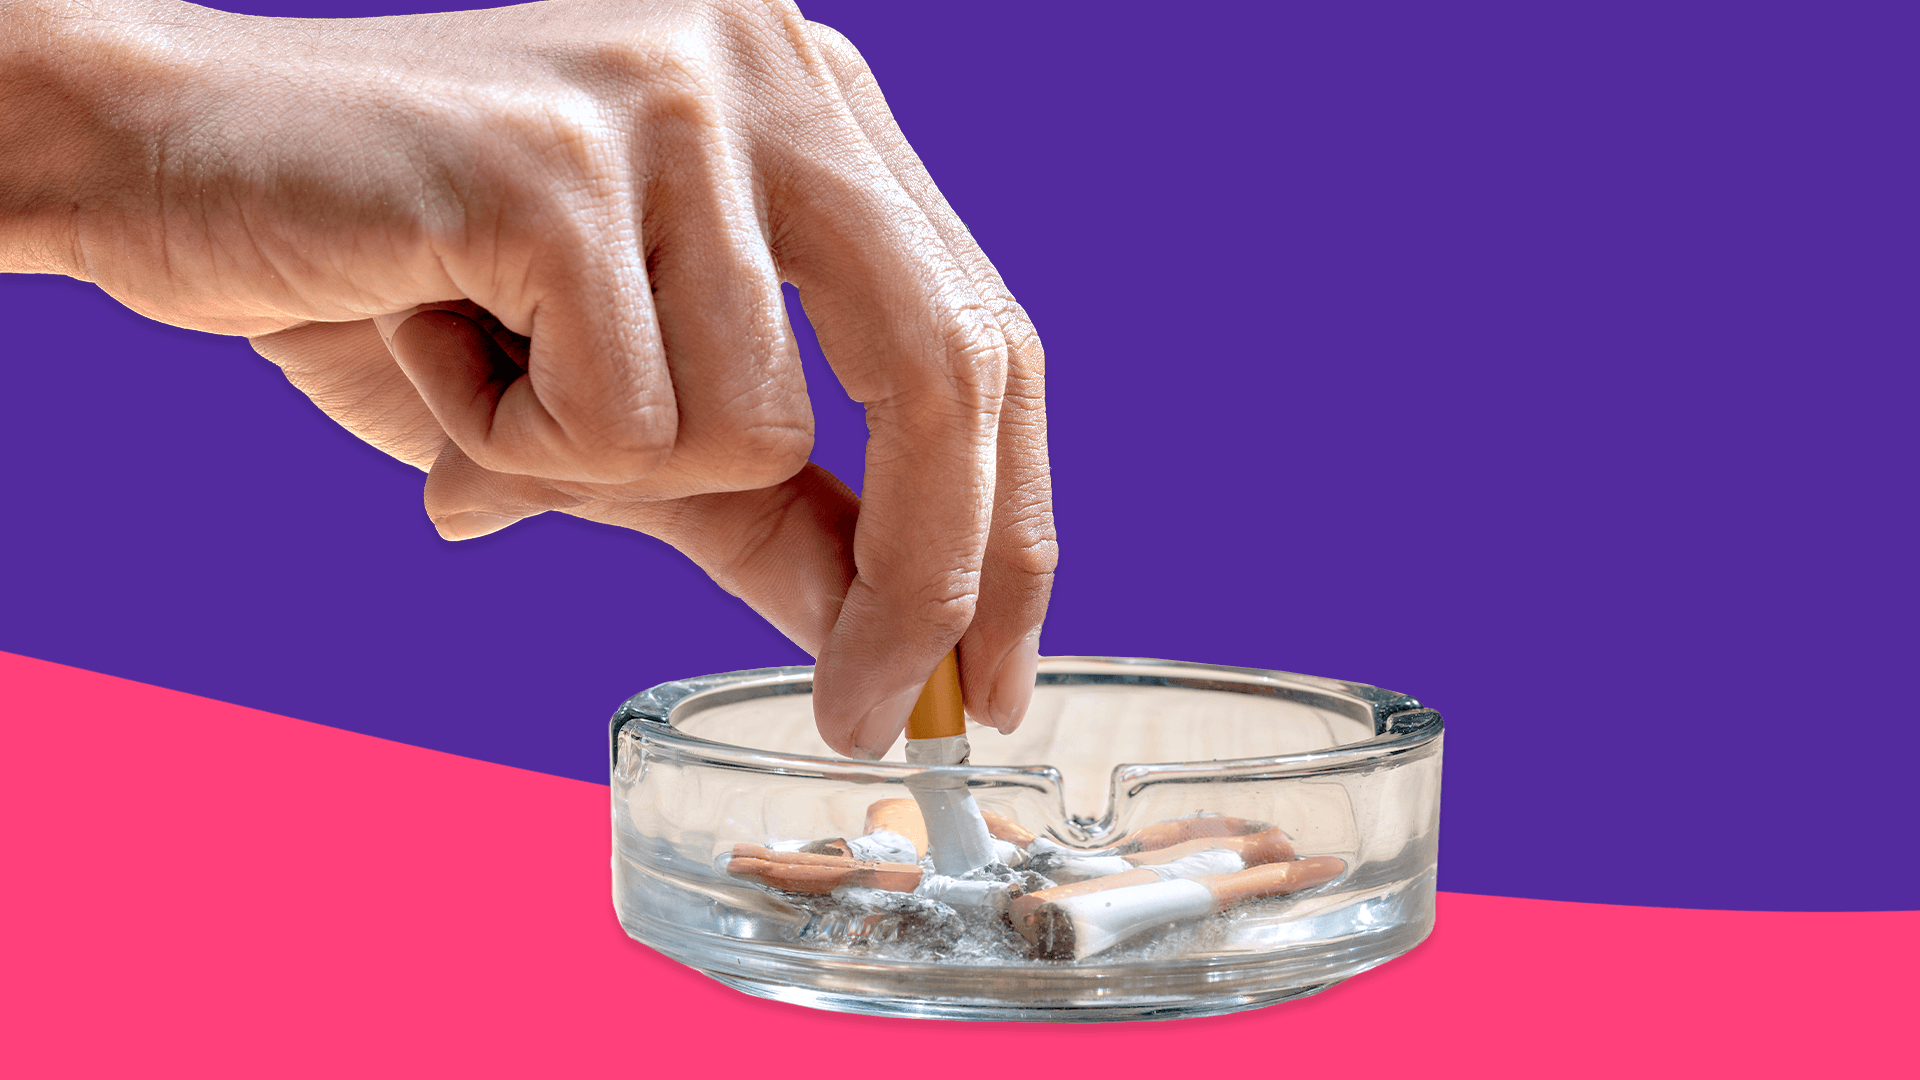 What happens when you stop smoking? An ashtray and stubbed out cigarette